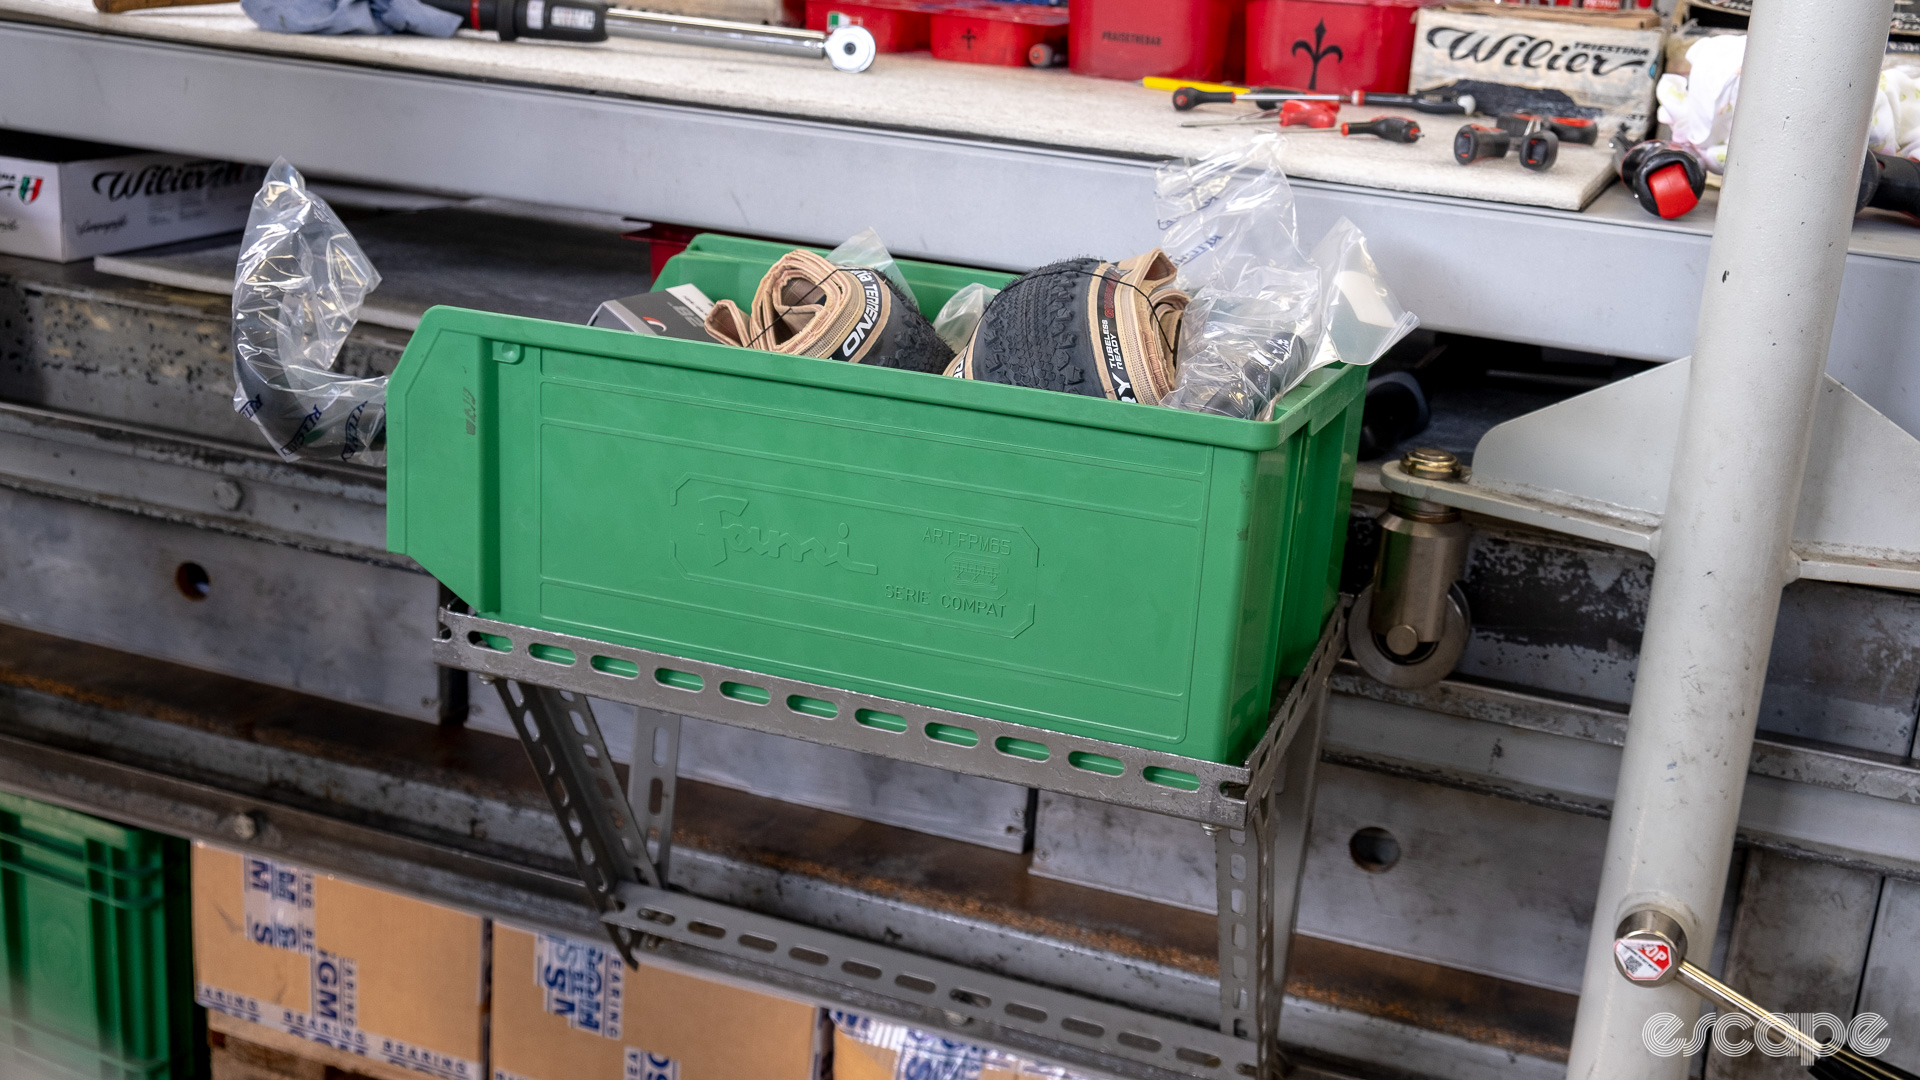 The photo shows the parts bin sat on a tray mounted to the assembly line.